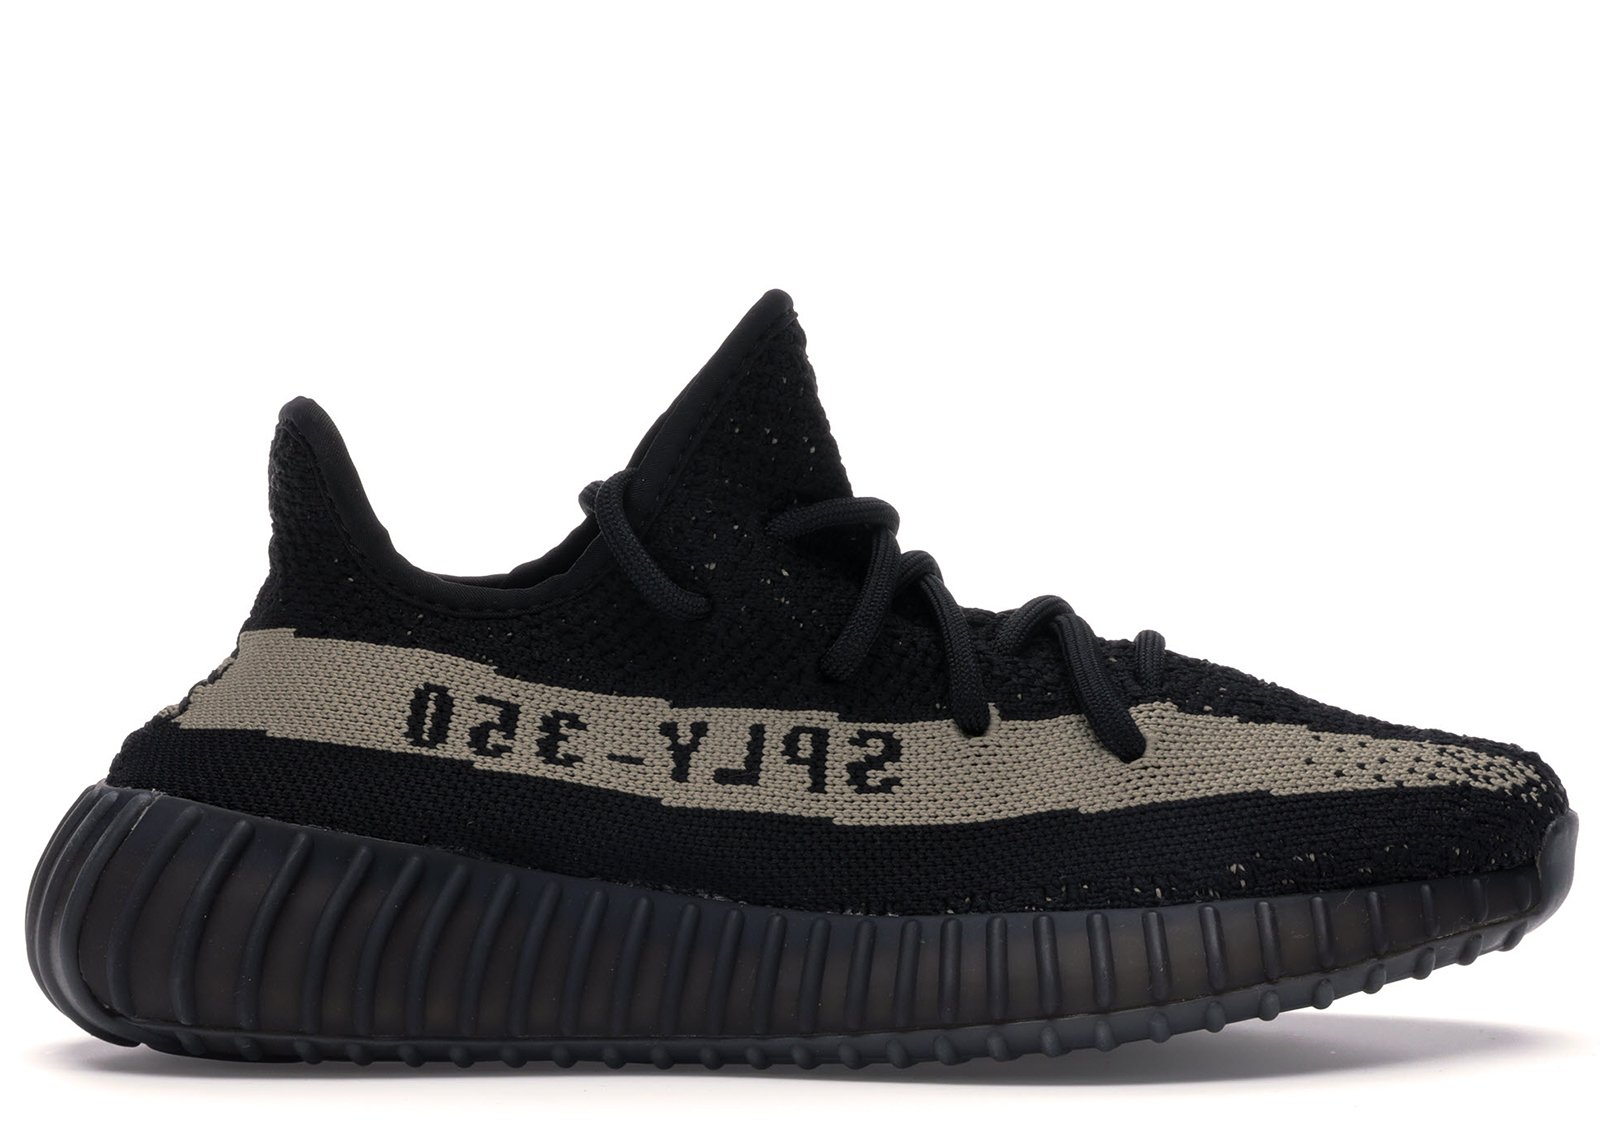 adidas Yeezy Boost 350 V2 Core Black Green sneakers